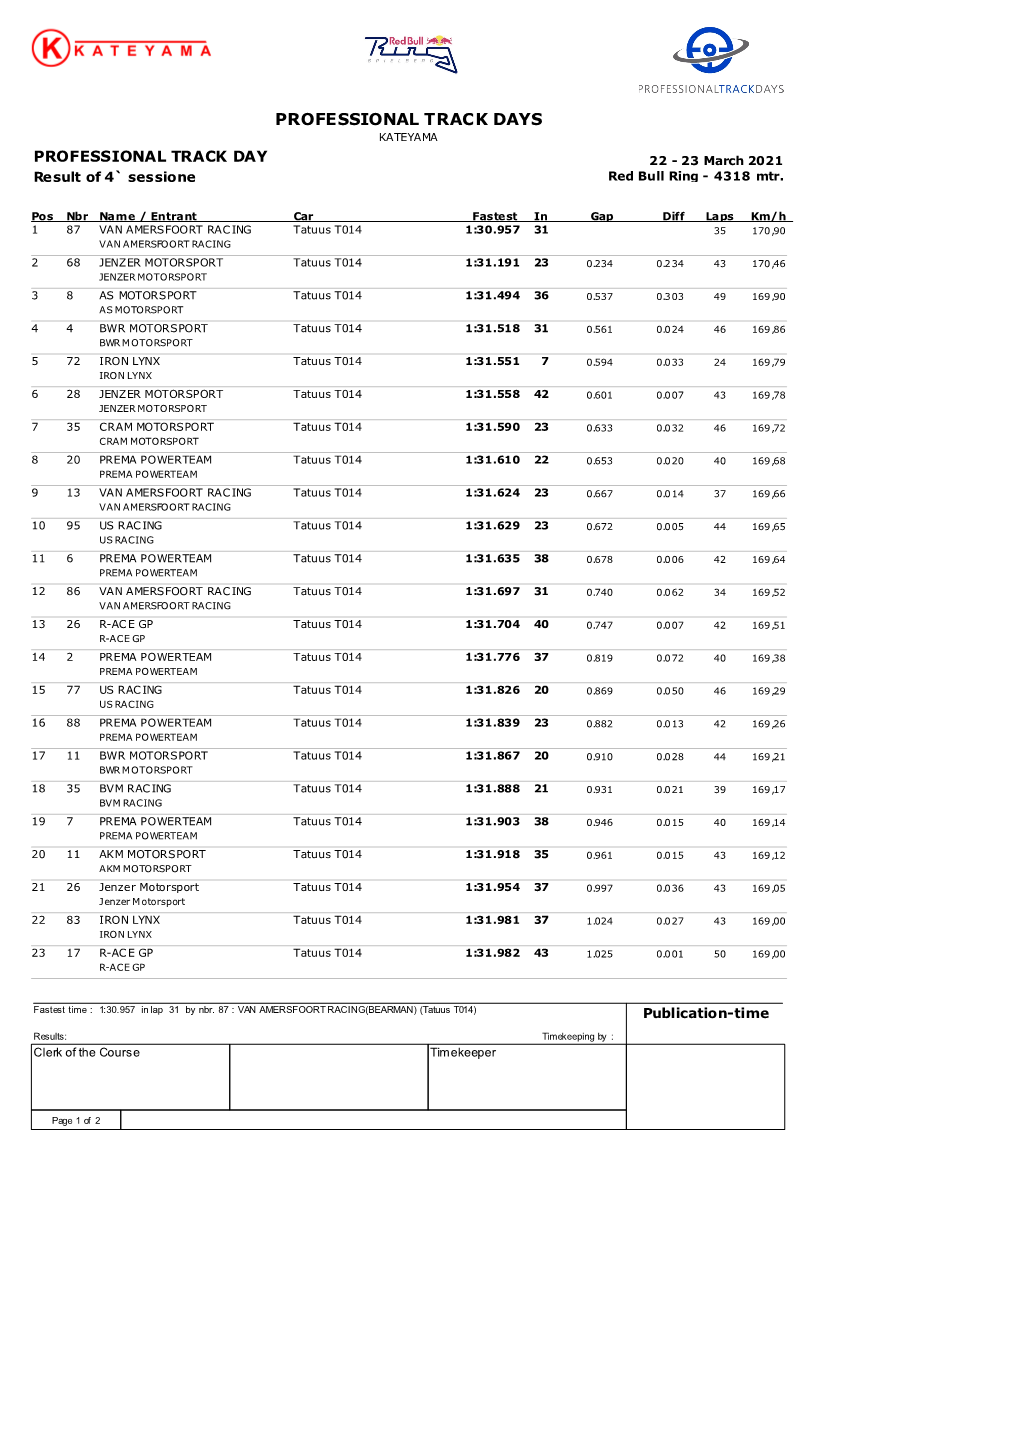 PROFESSIONAL TRACK DAYS KATEYAMA PROFESSIONAL TRACK DAY 22 - 23 March 2021 Result of 4` Sessione Red Bull Ring - 4318 Mtr